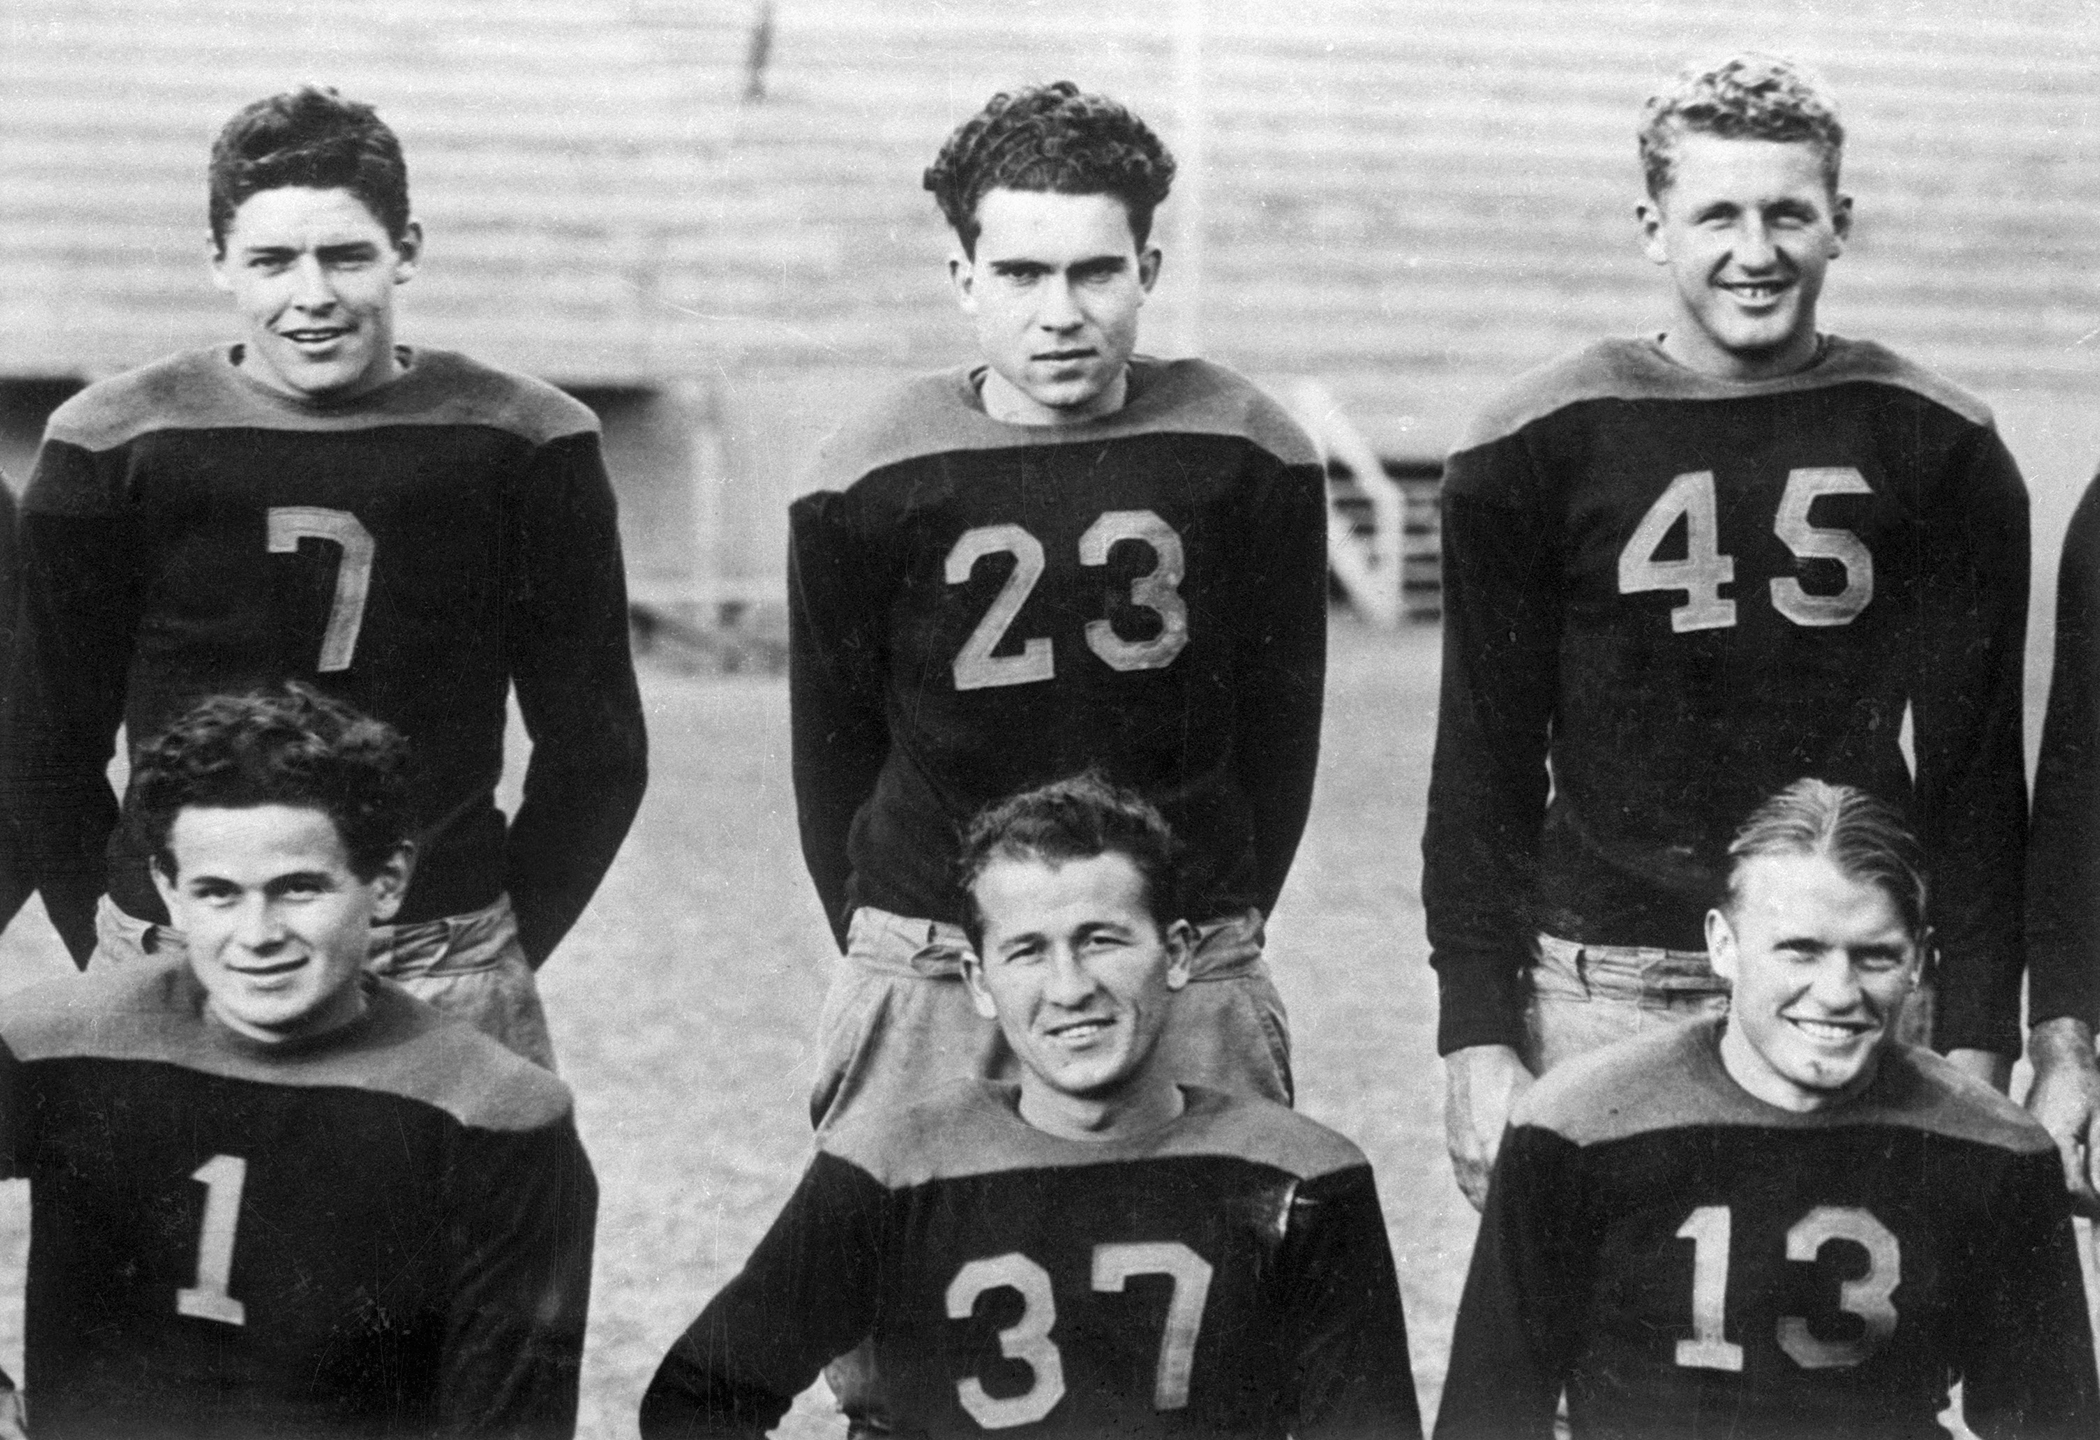 Richard Nixon stands in a numbered uniform (#23) with fellow football players during his senior year at Whittier College, January 1, 1934.